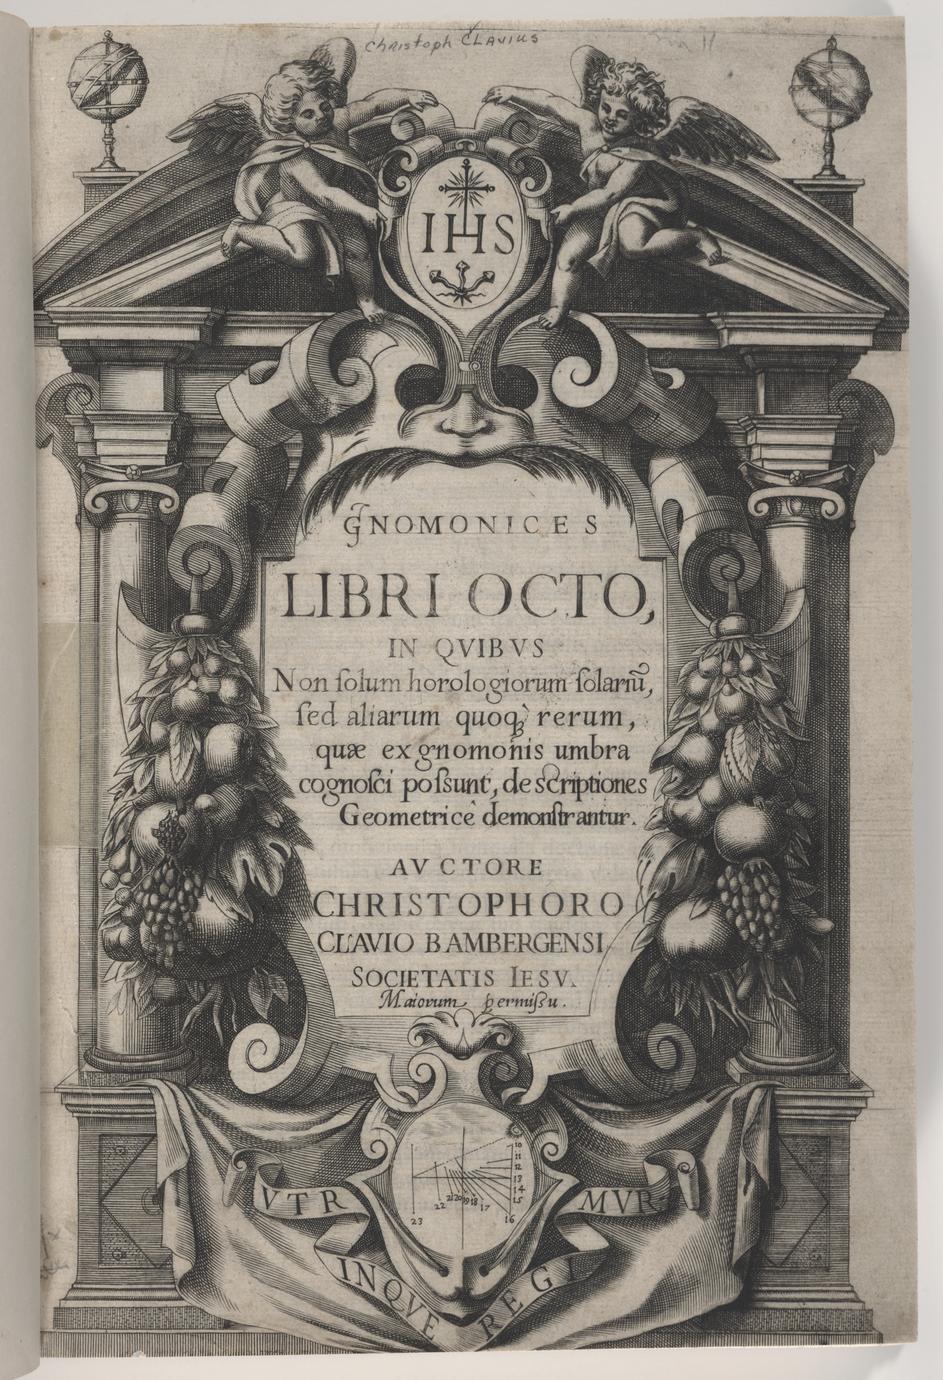 Engraved title page of gnomonices